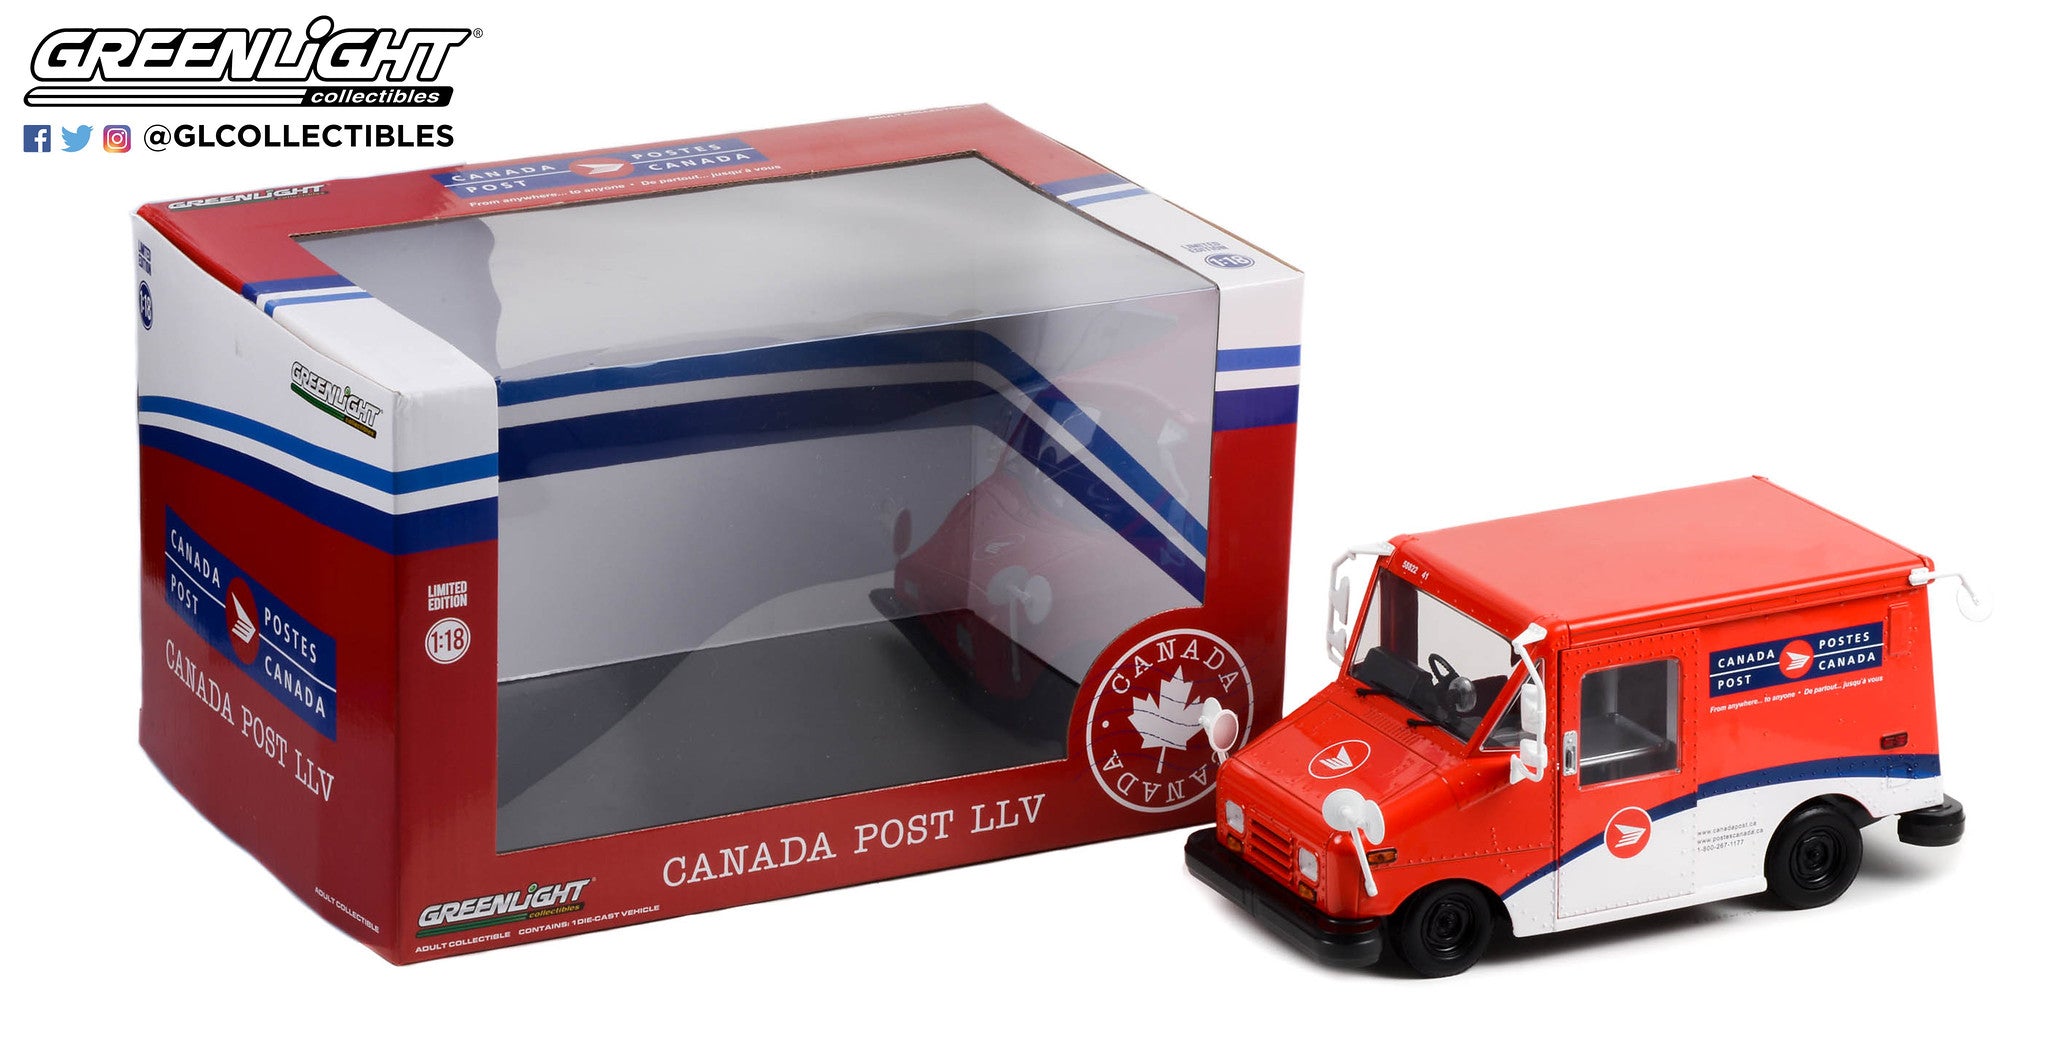 GreenLight 1:18 Canada Post Long-Life Postal Delivery Vehicle